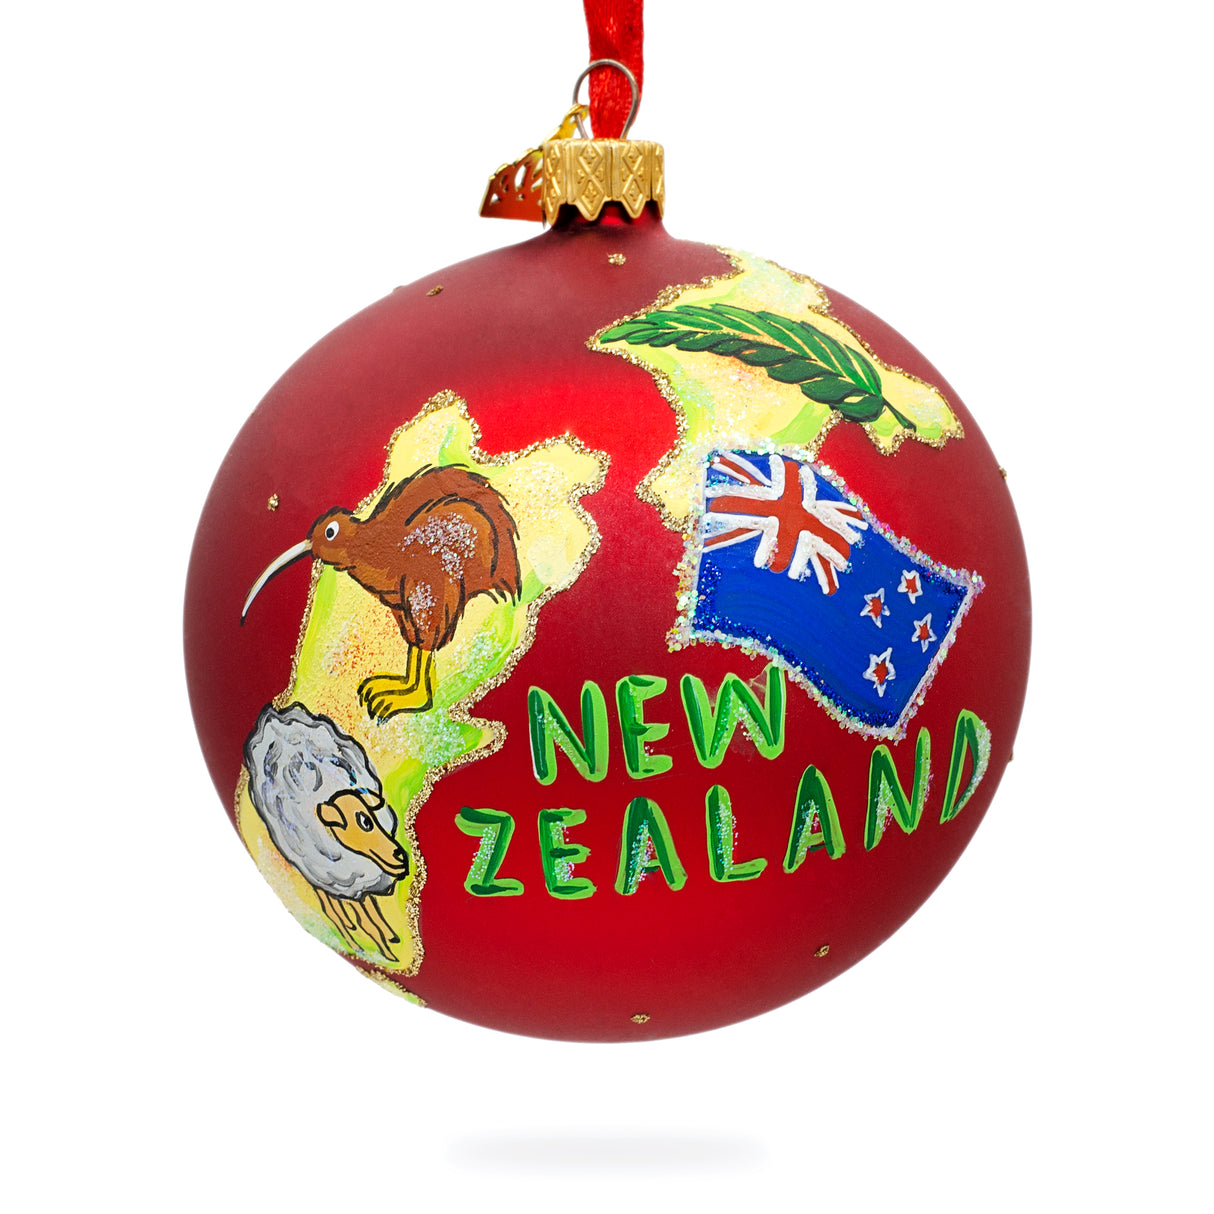 Travel to New Zealand Glass Ball Christmas Ornament 4 Inches in Multi color, Round shape